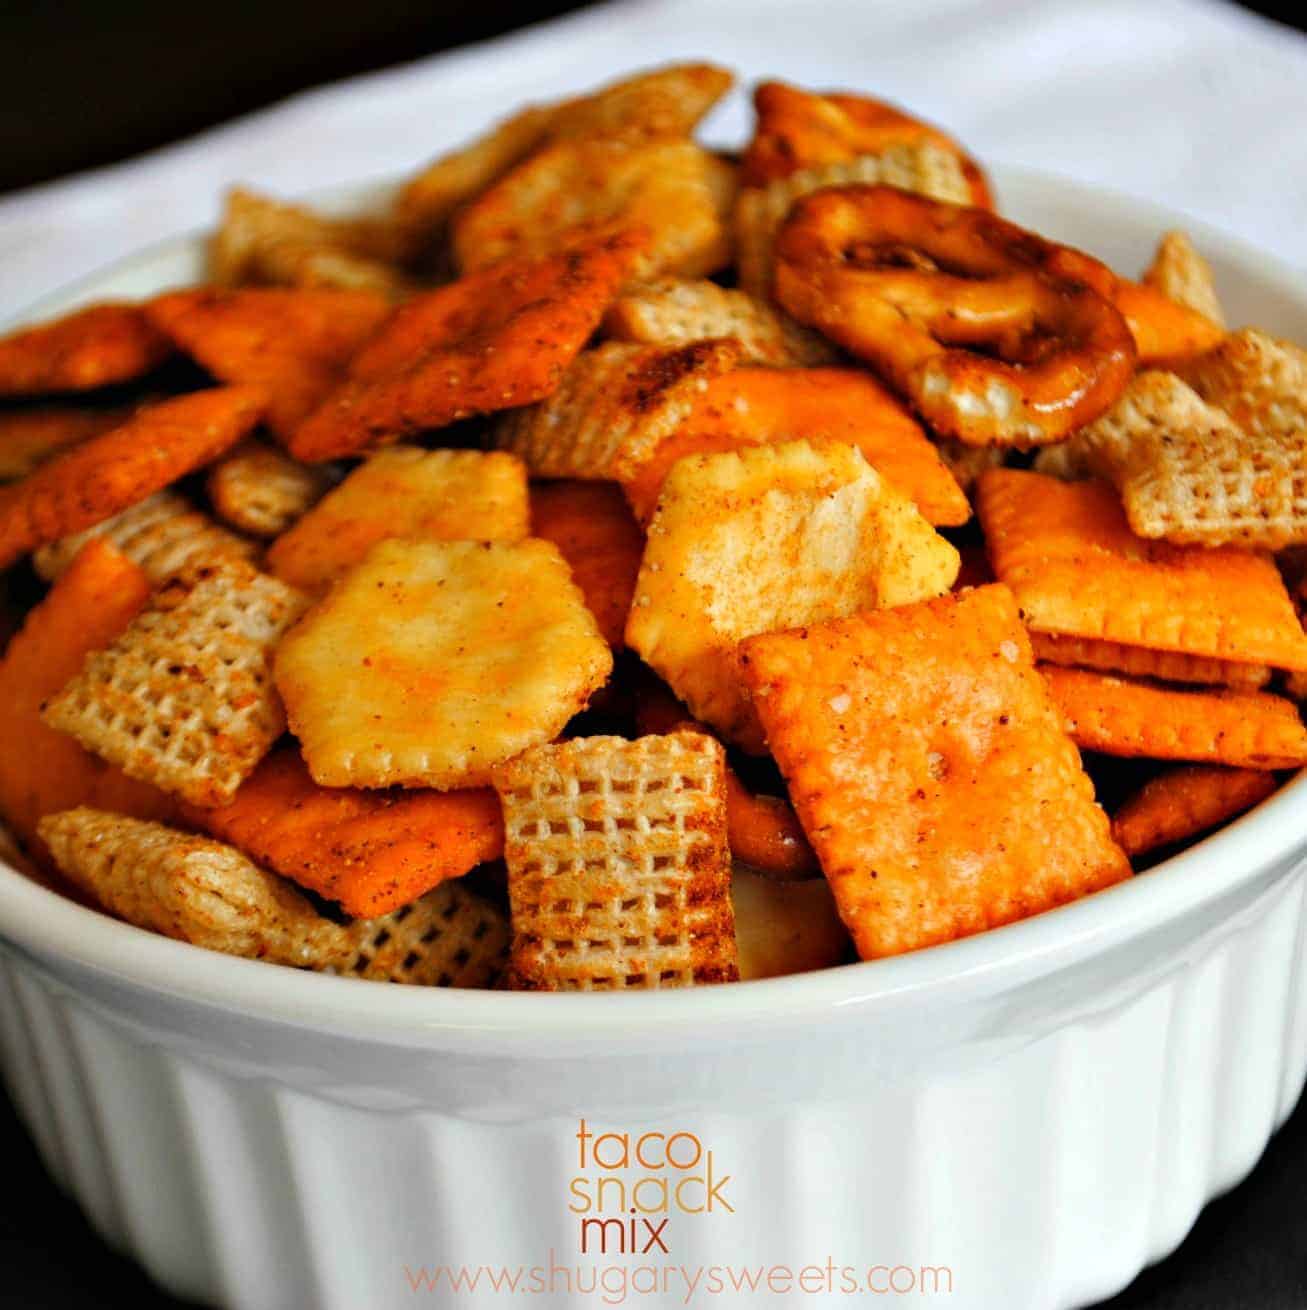 Taco Snack Mix - Shugary Sweets